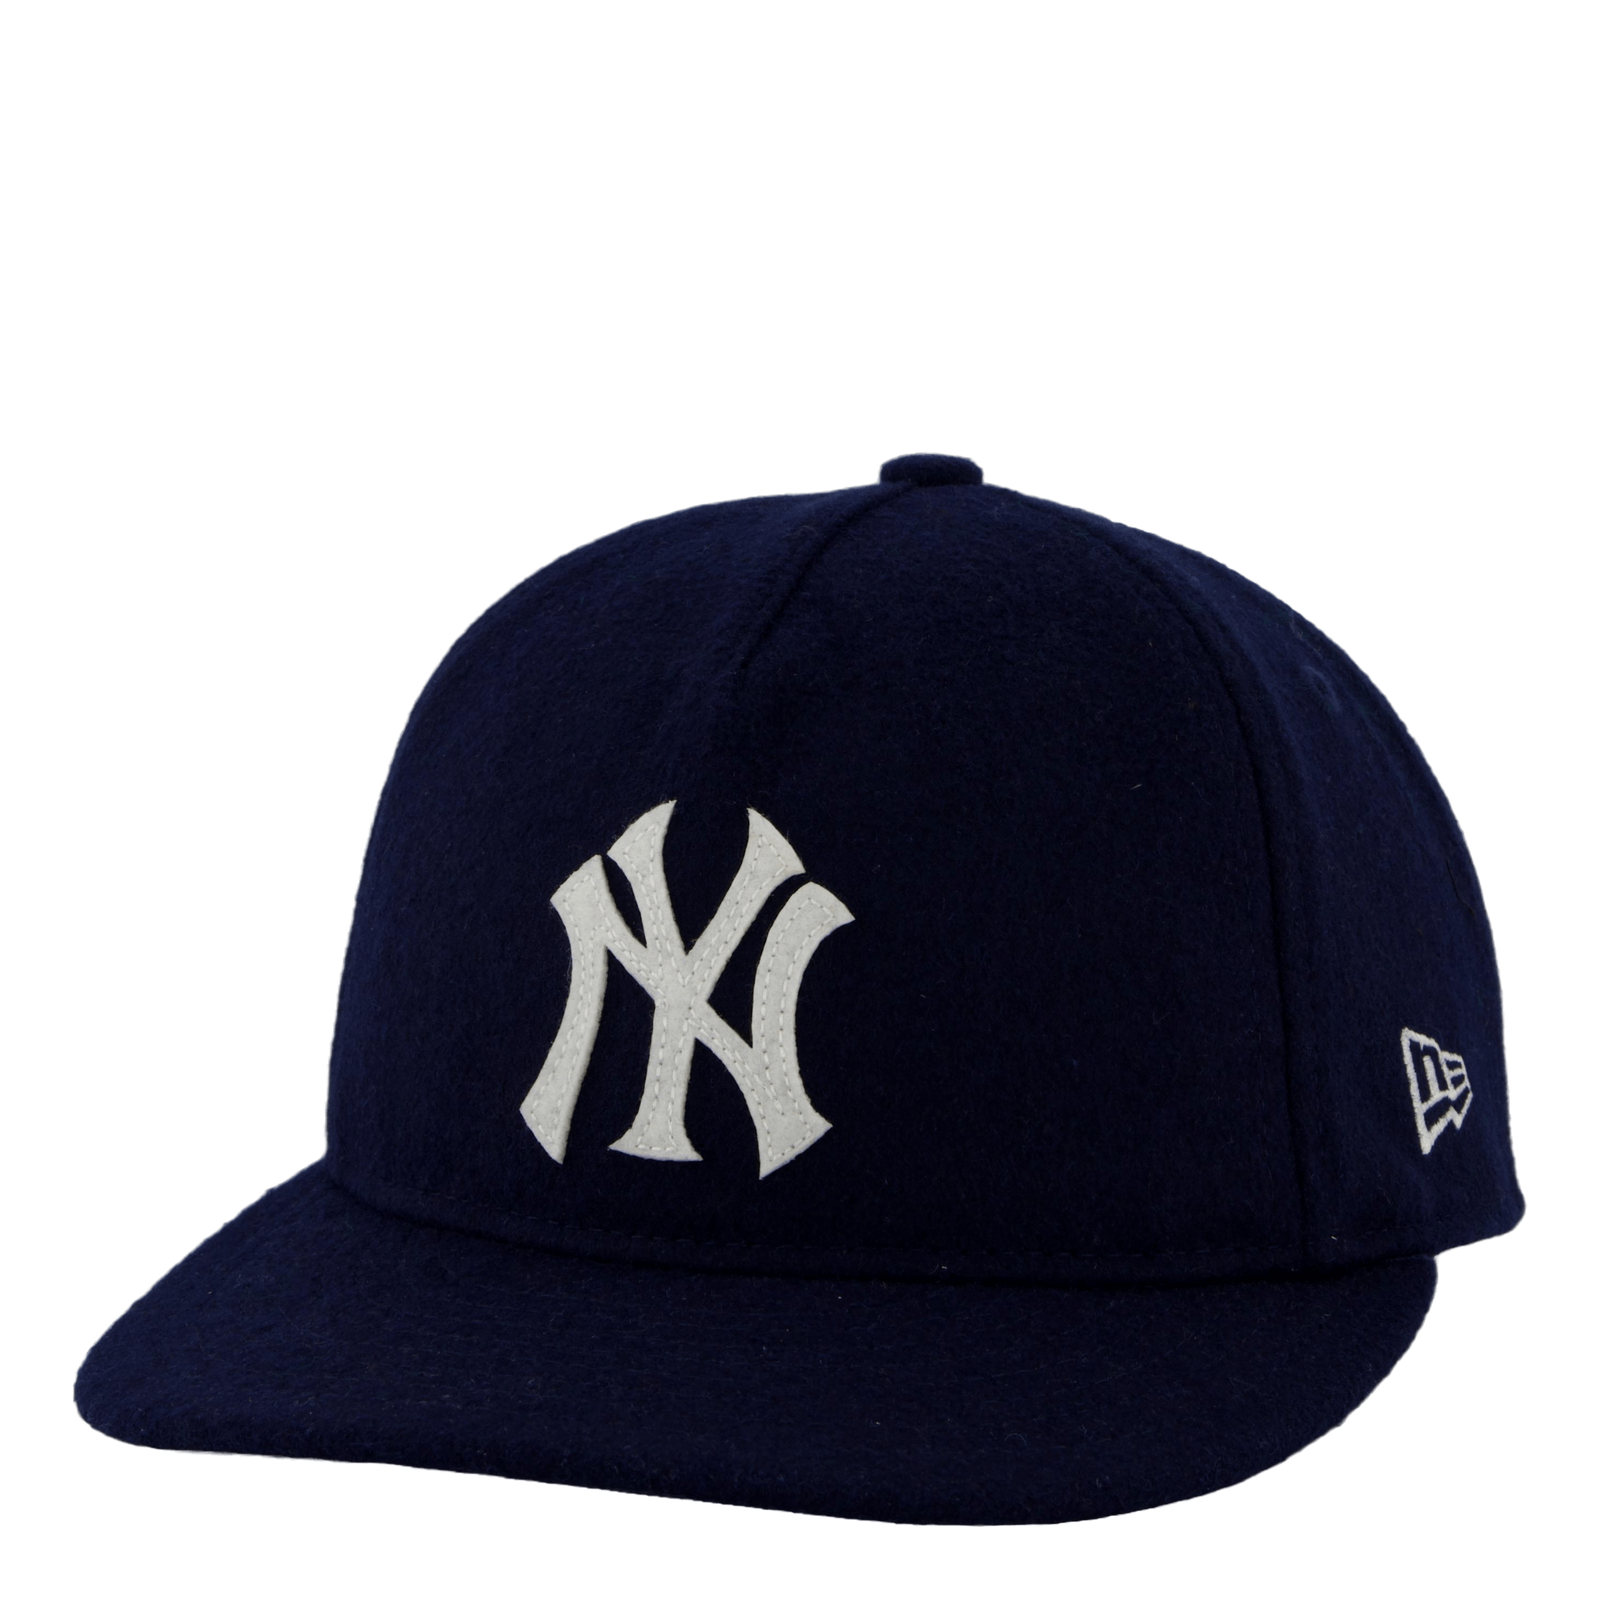 Mlb Coop 9fifty Rc Yankees Nvy